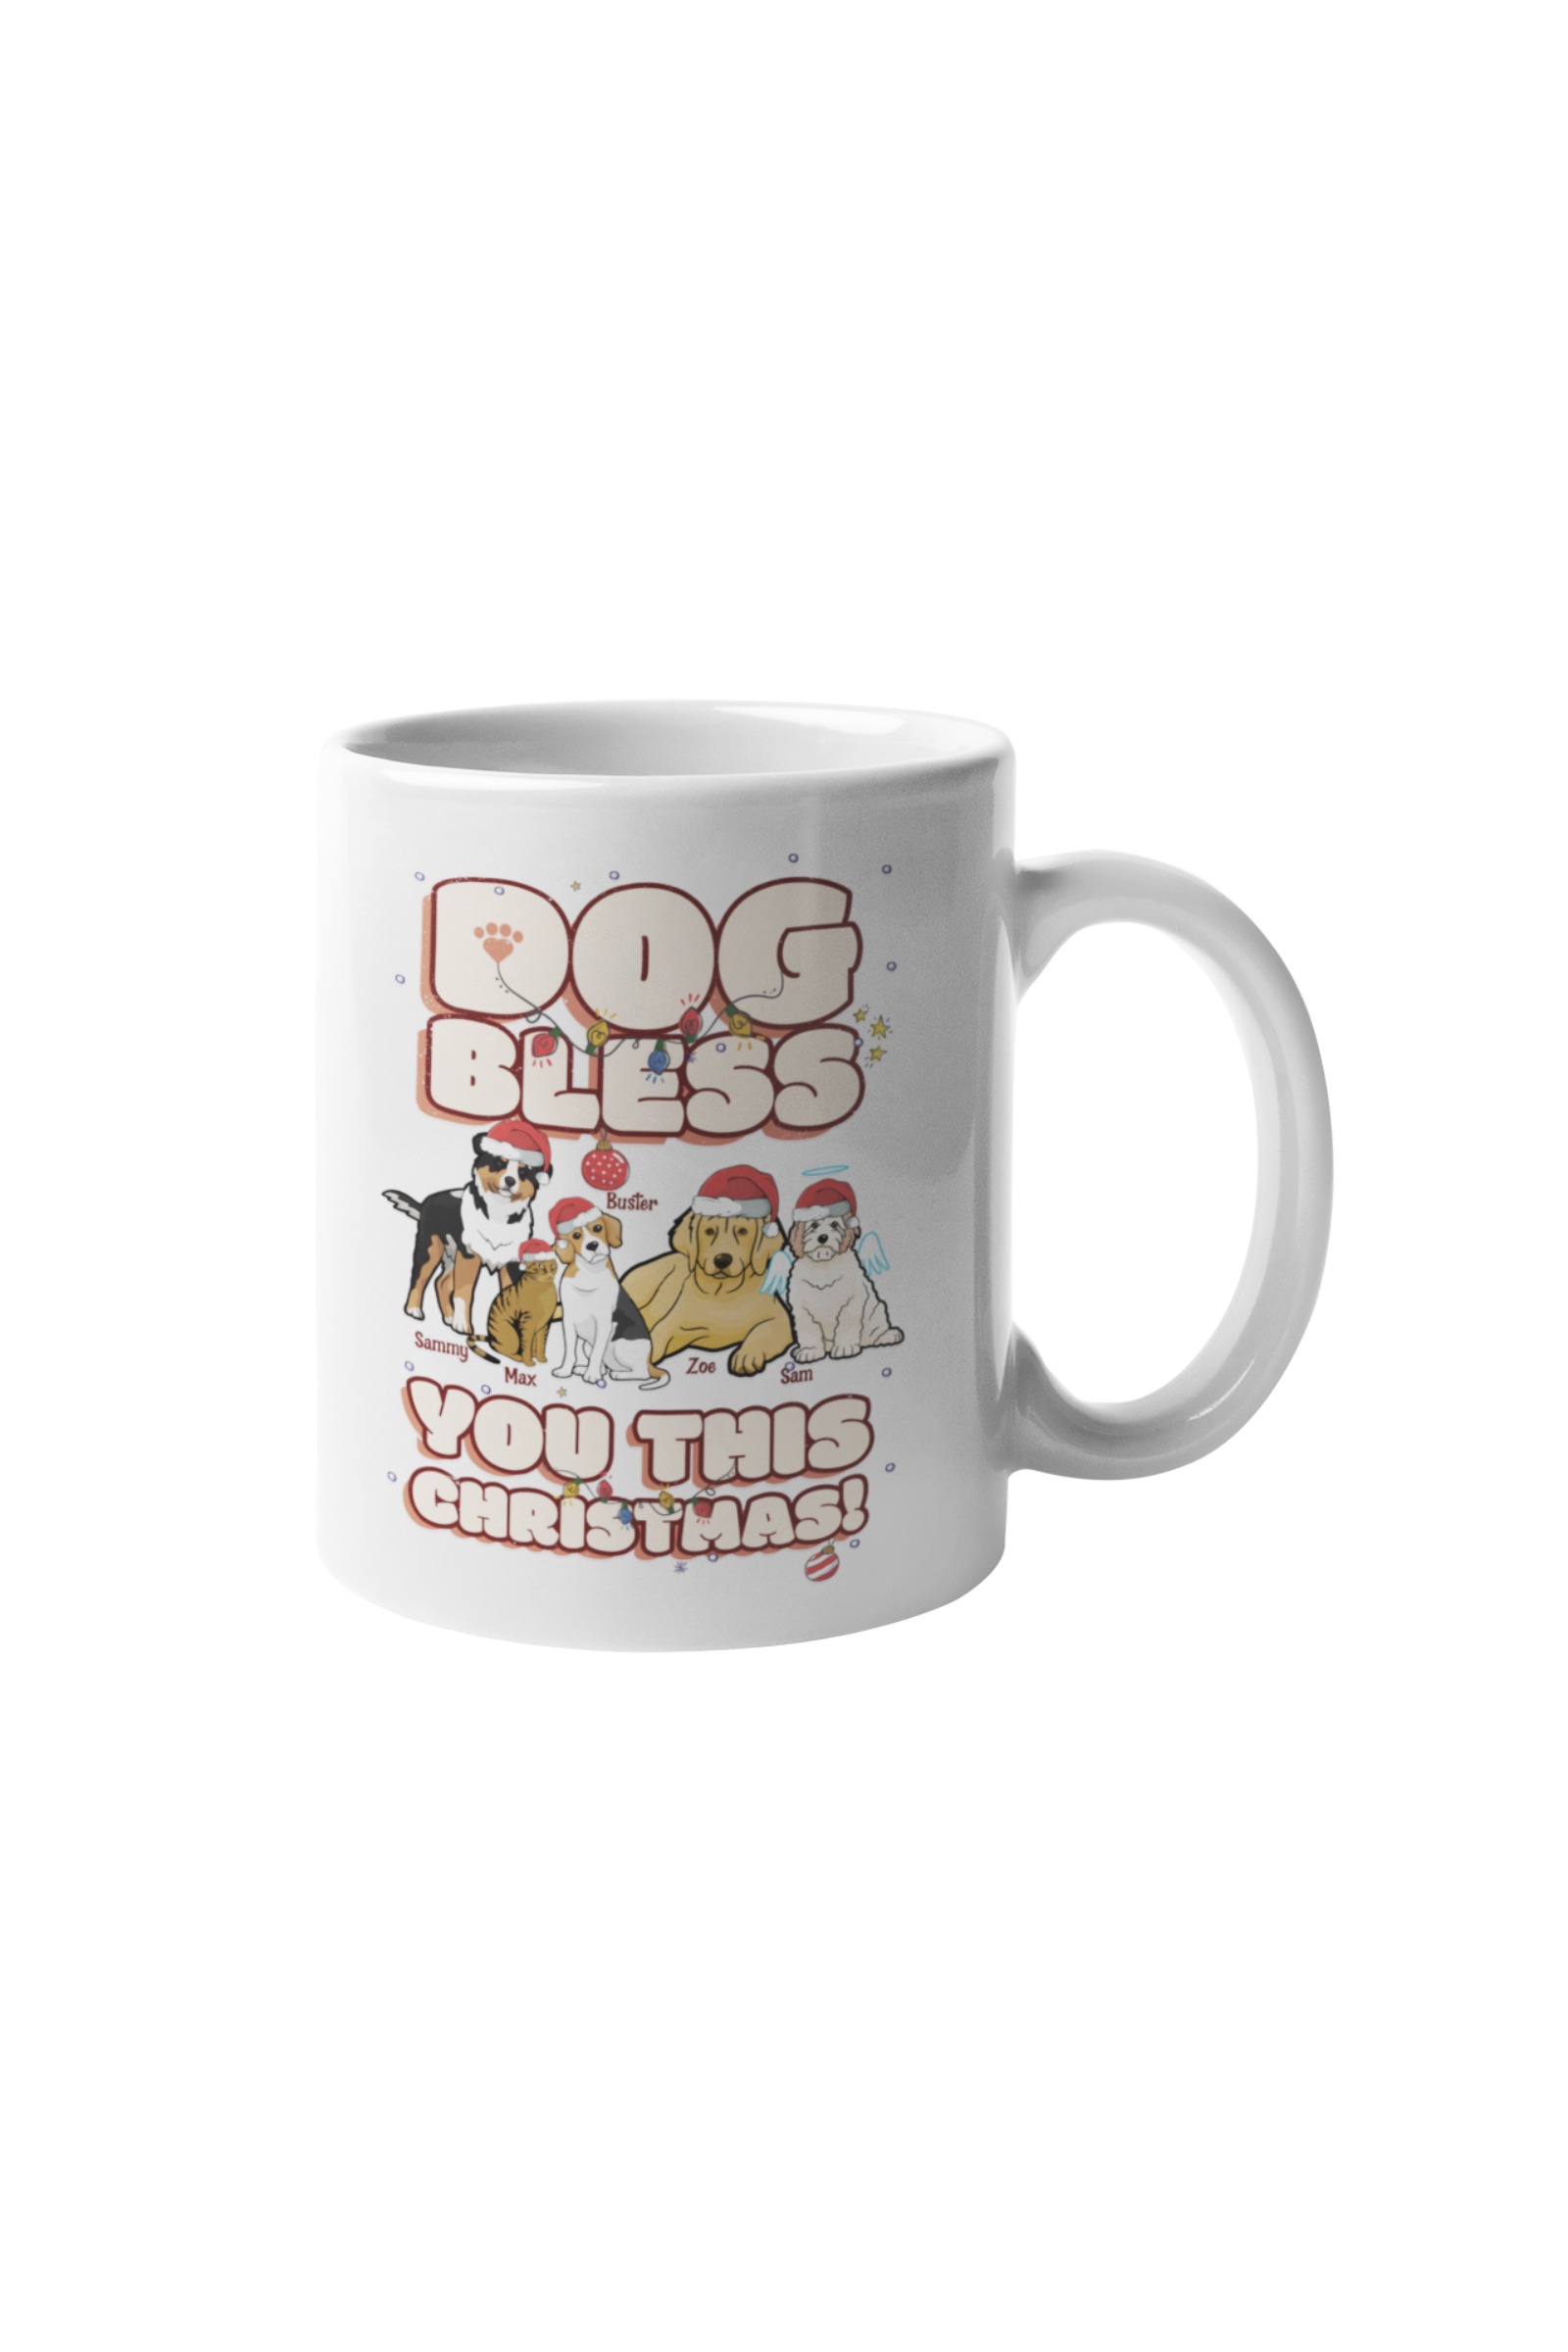 Dogs Bless You This Christmas Themed Coffee Mug for Pet Lovers